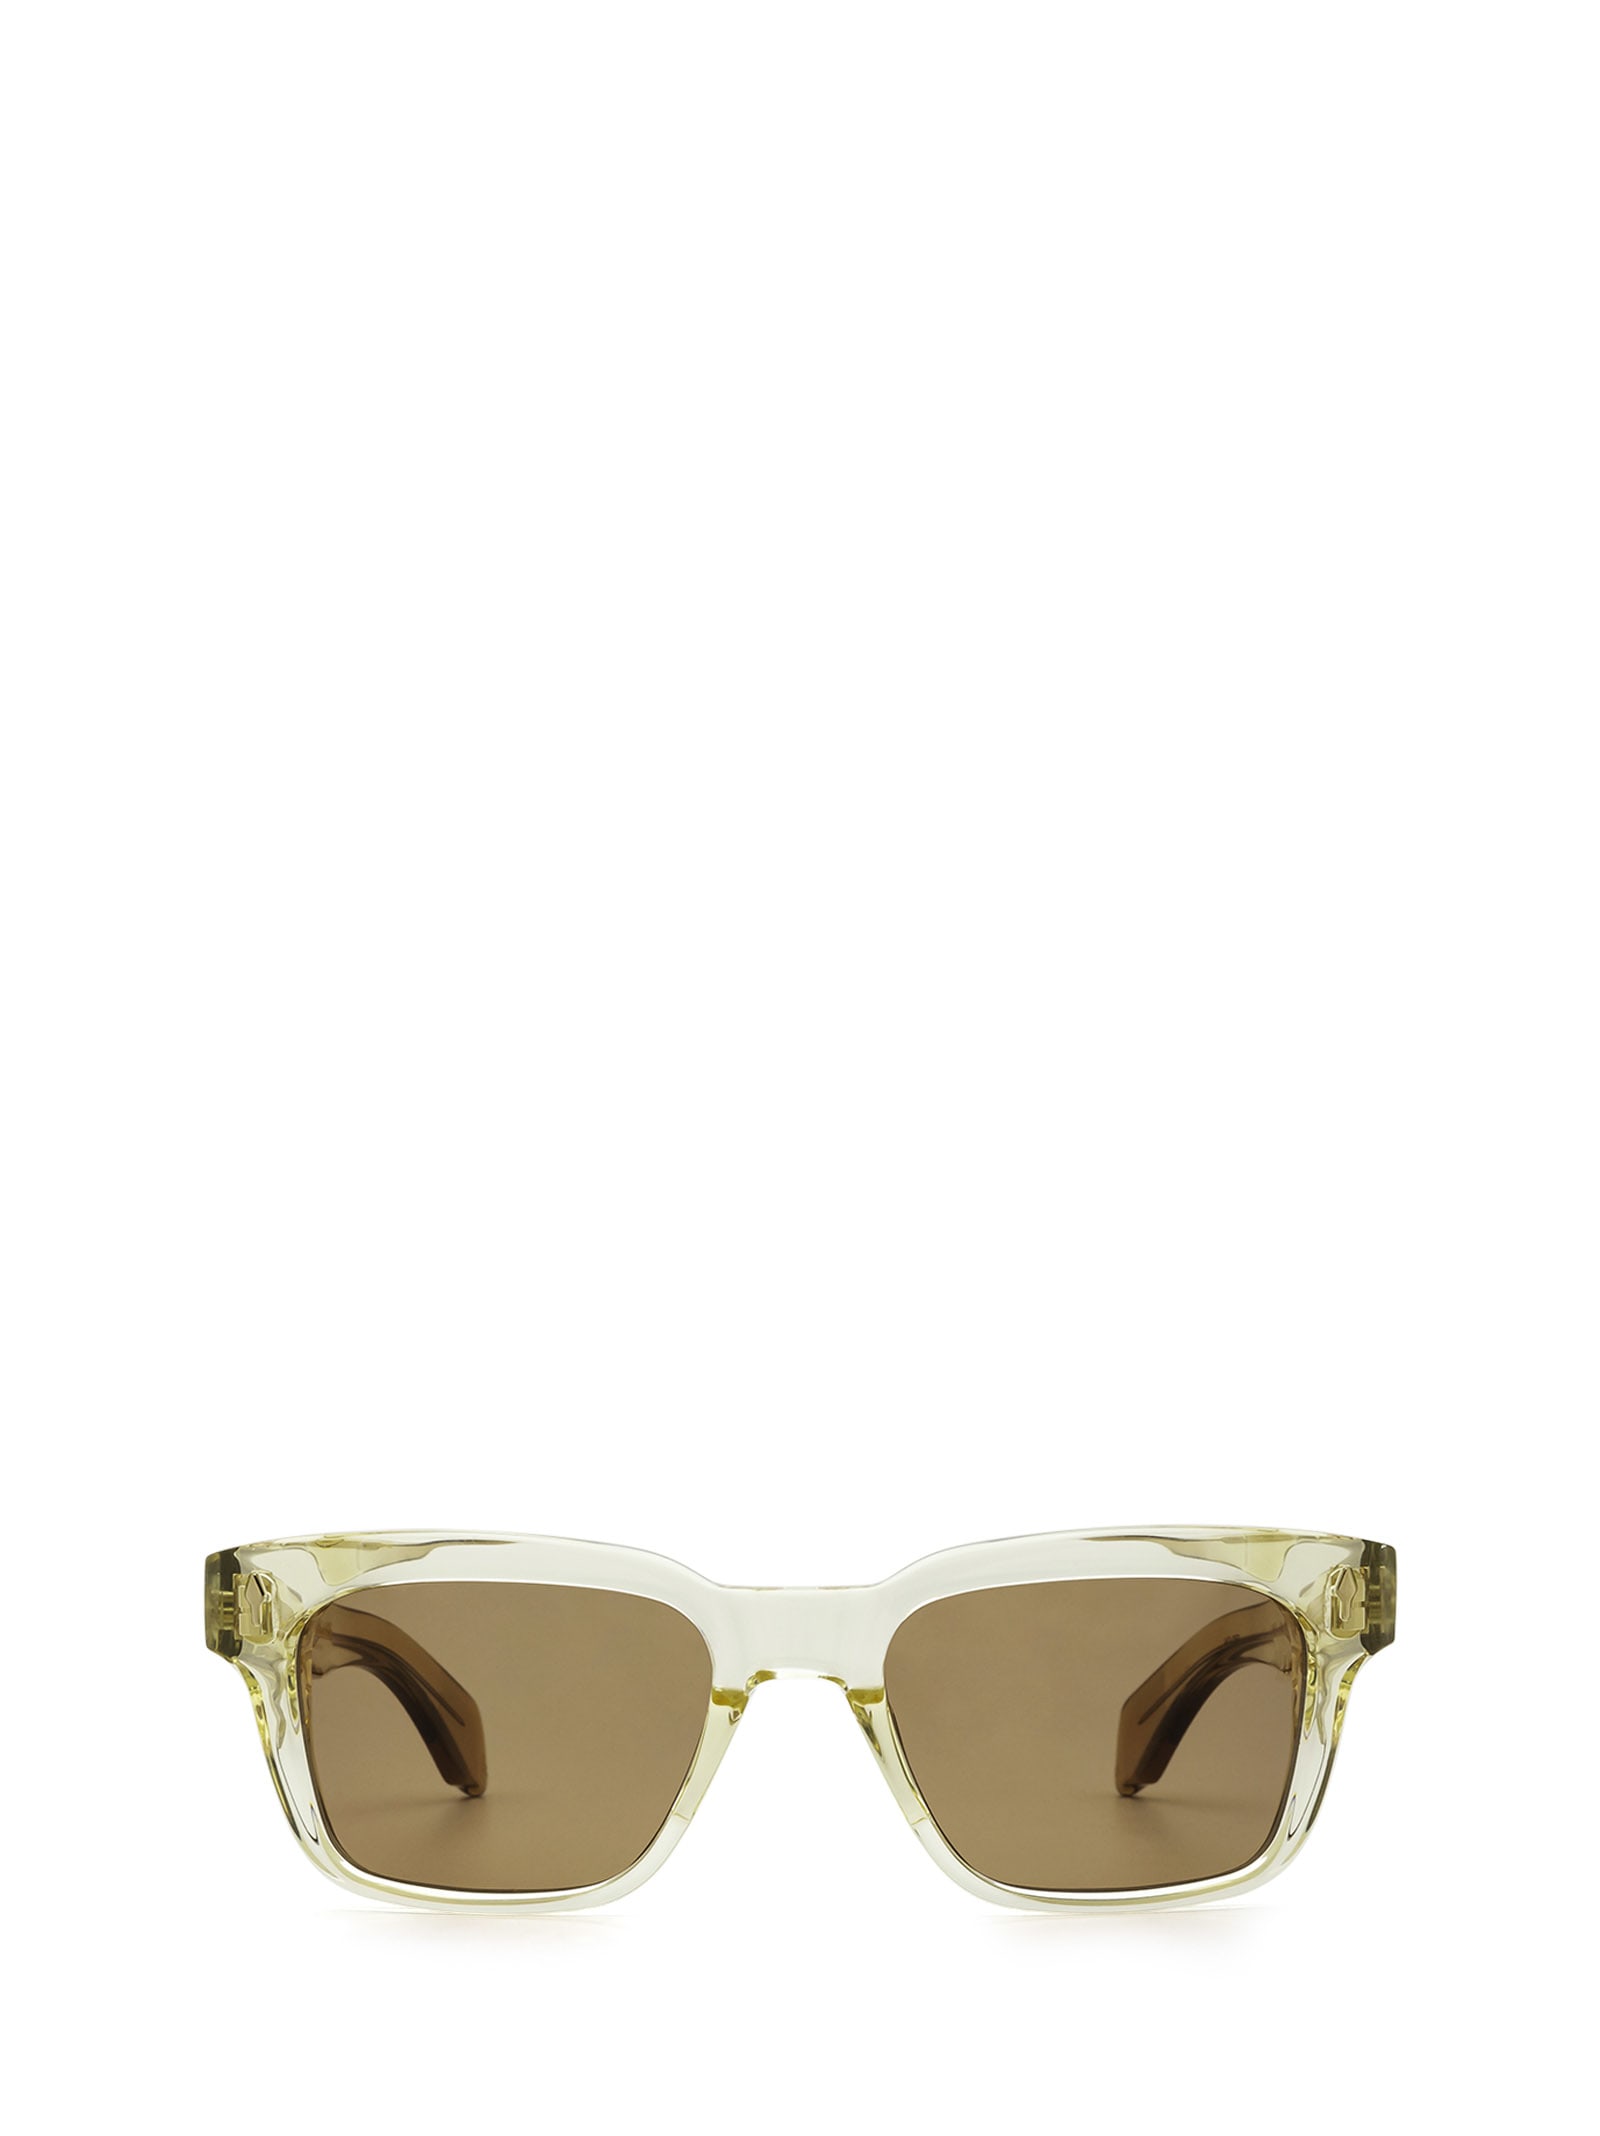 Jacques Marie Mage Jacques Marie Mage Molino Light Gold Sunglasses